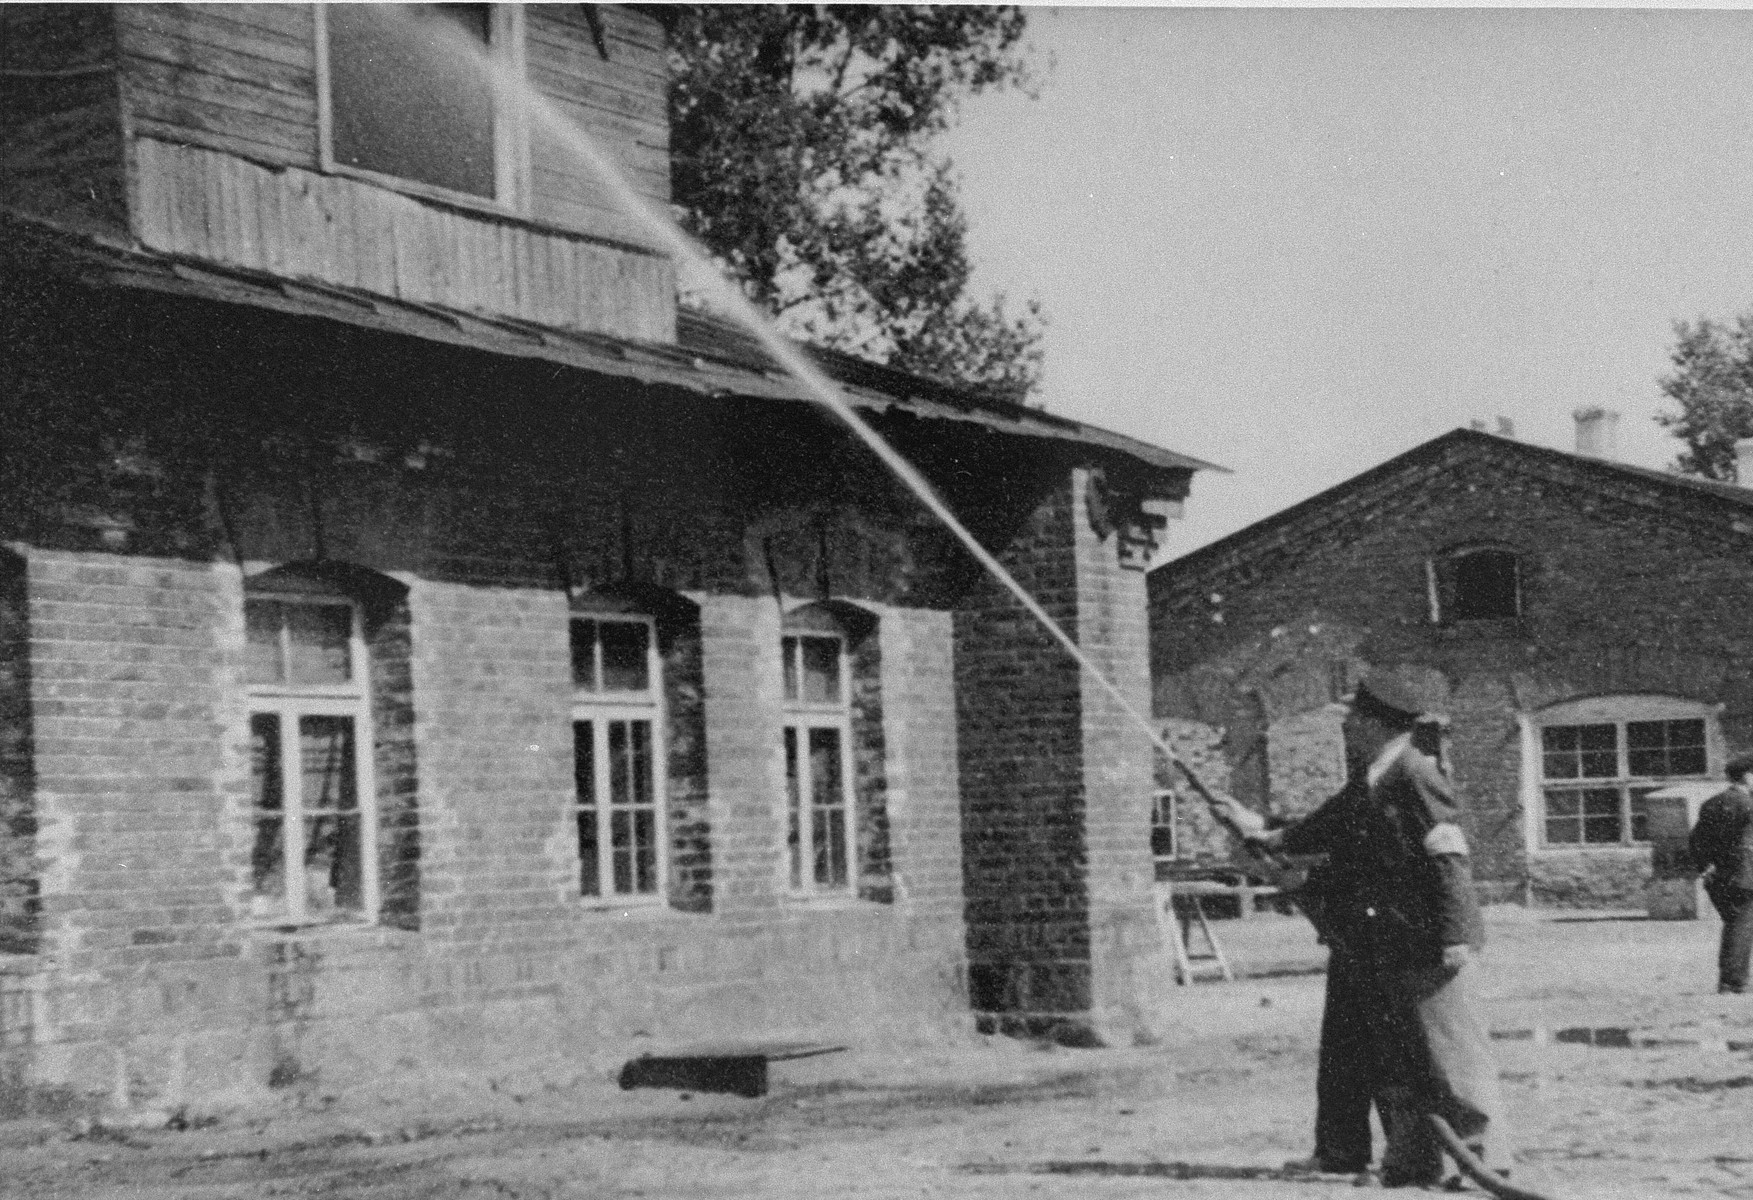 Members of the Kovno ghetto firefighting brigade aim a hose at an upstairs window of a house in the ghetto.